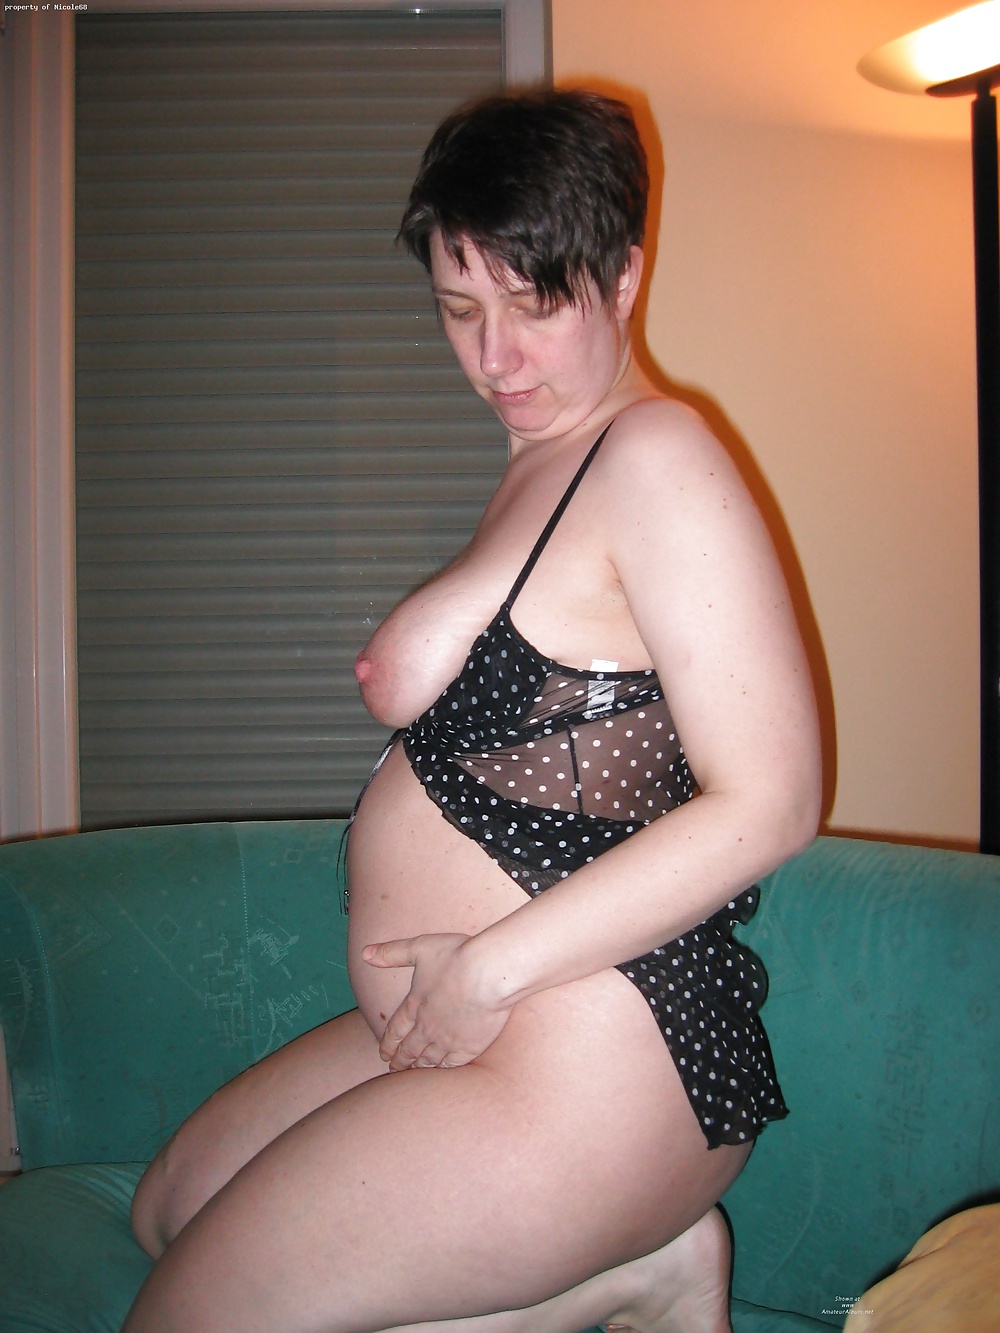 Big Fat Hairy Panties - See and Save As pregnant hairy panties big tits dirty holes fat asses porn  pict - 4crot.com